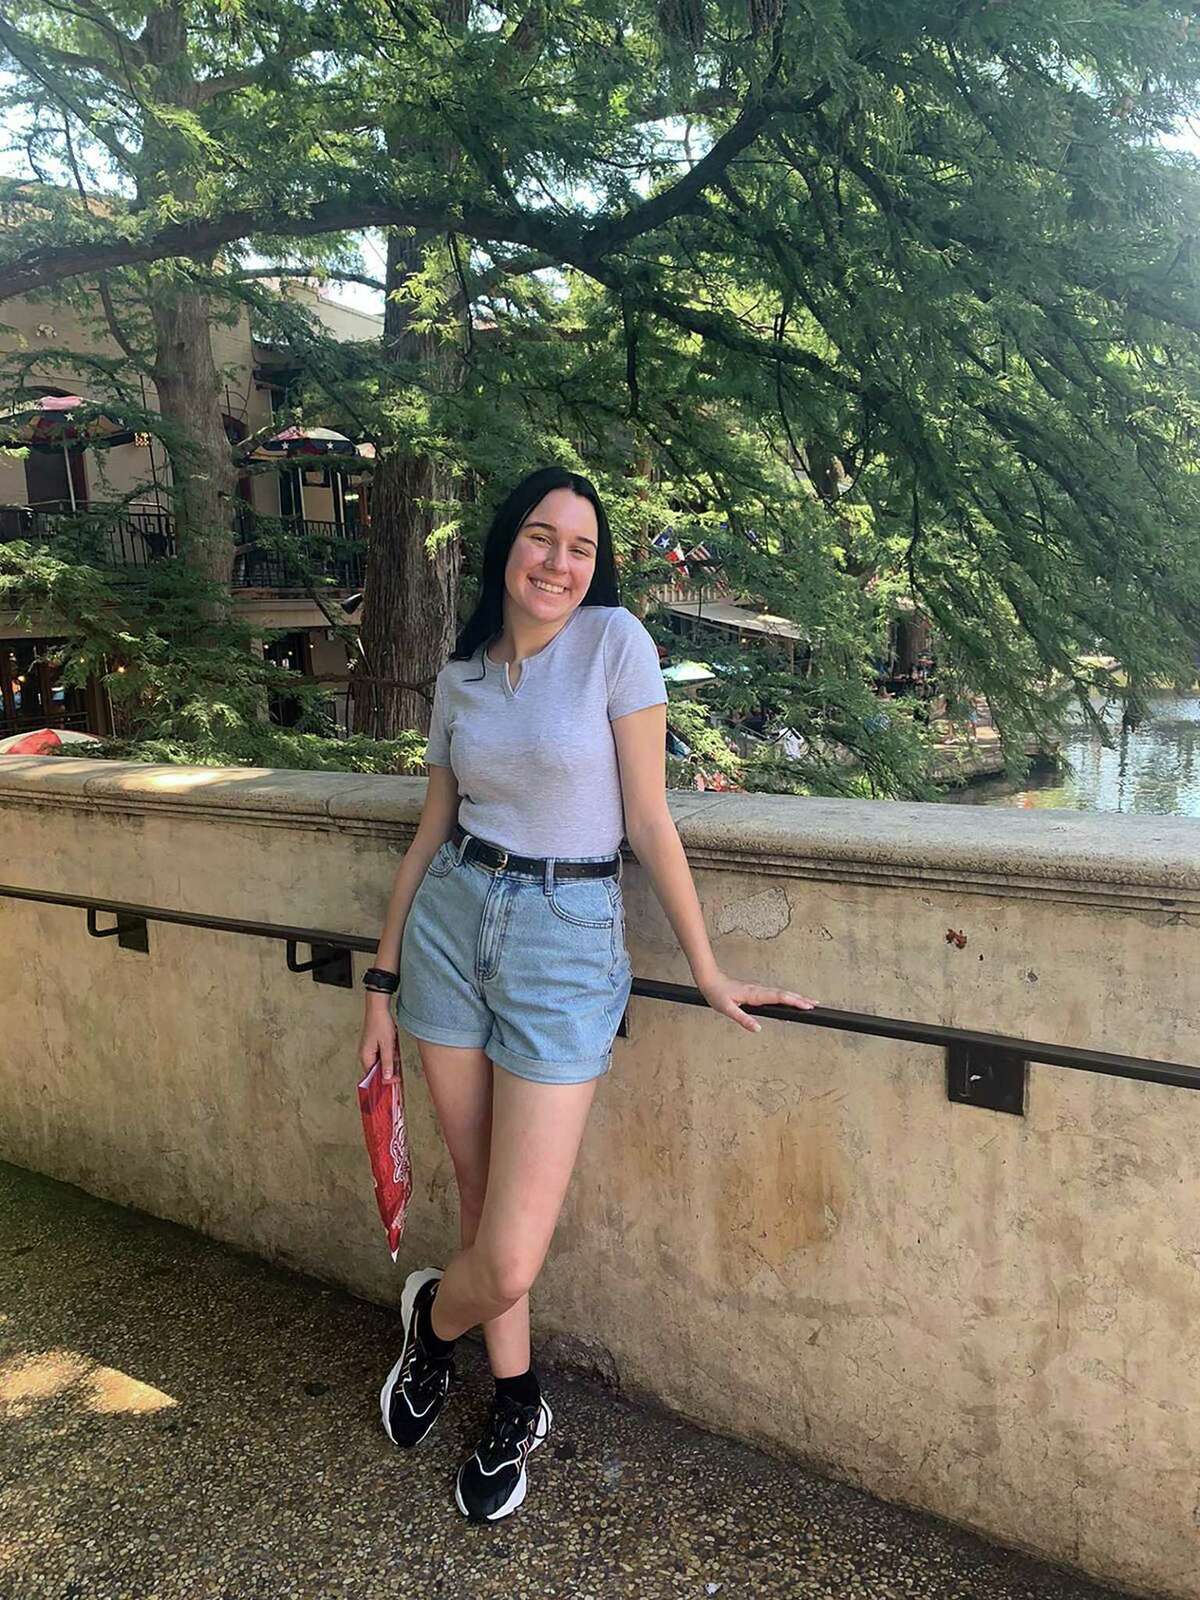 Wiktoria Ludwiczak, from the small Polish village of Rzeczków, spent part of her junior year in San Antonio as an exchange student at Smithson Valley High School. While here, she visited San Antonio staples such as the River Walk.